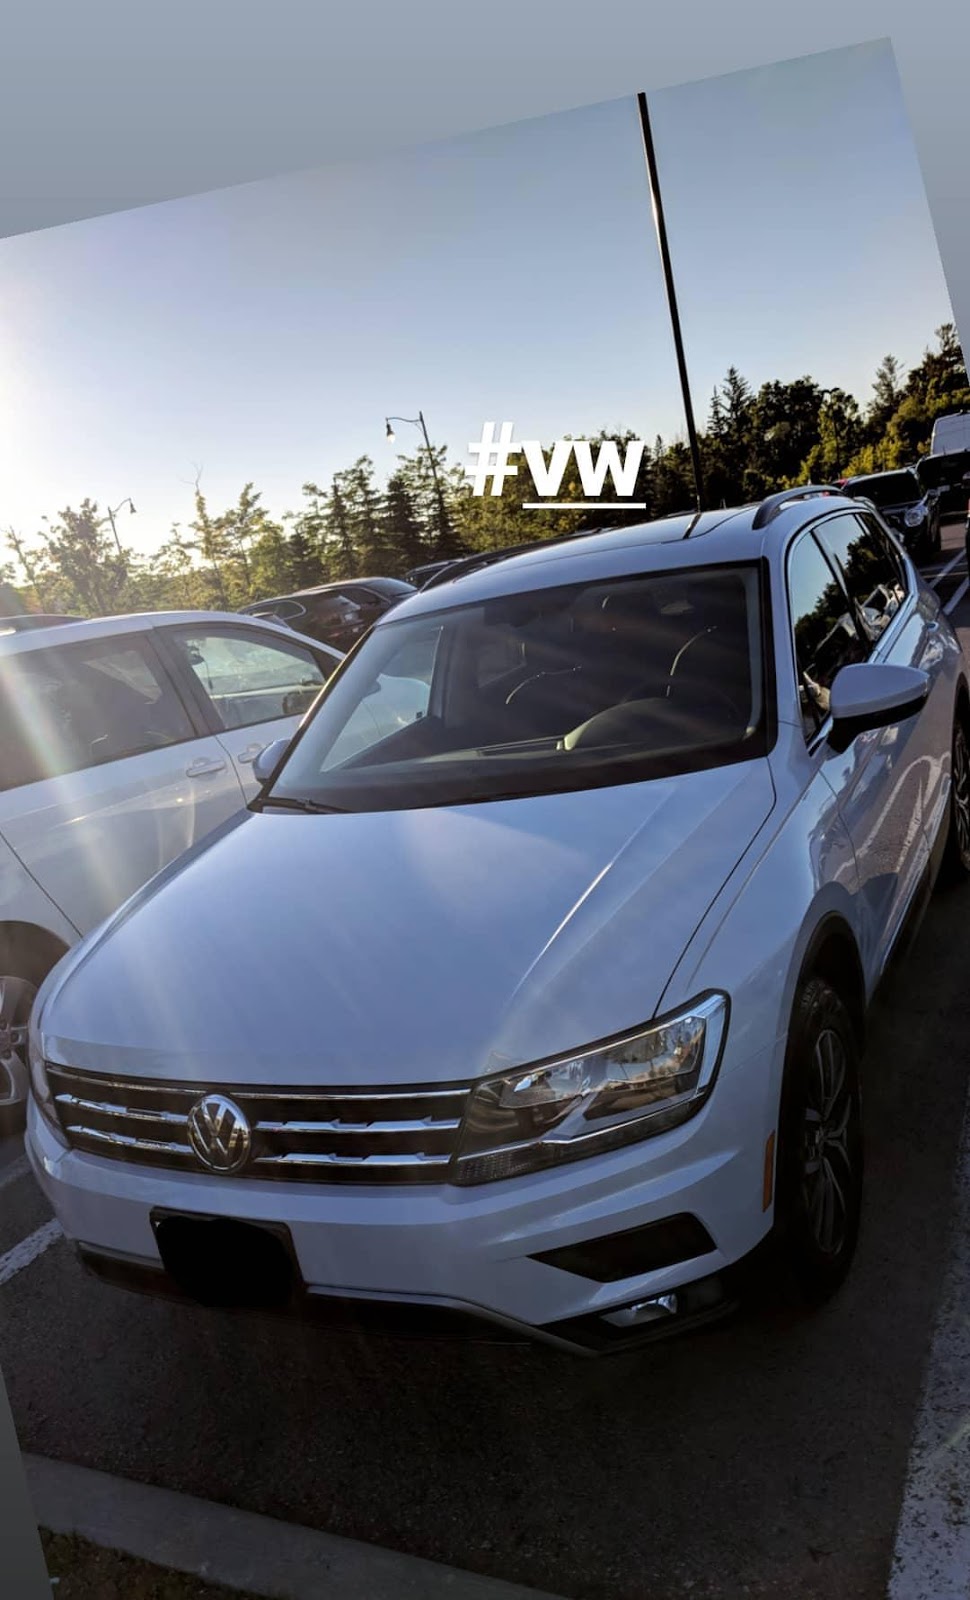 Volkswagen Villa | 212 Steeles Ave W, Thornhill, ON L4J 1A1, Canada | Phone: (905) 886-6880